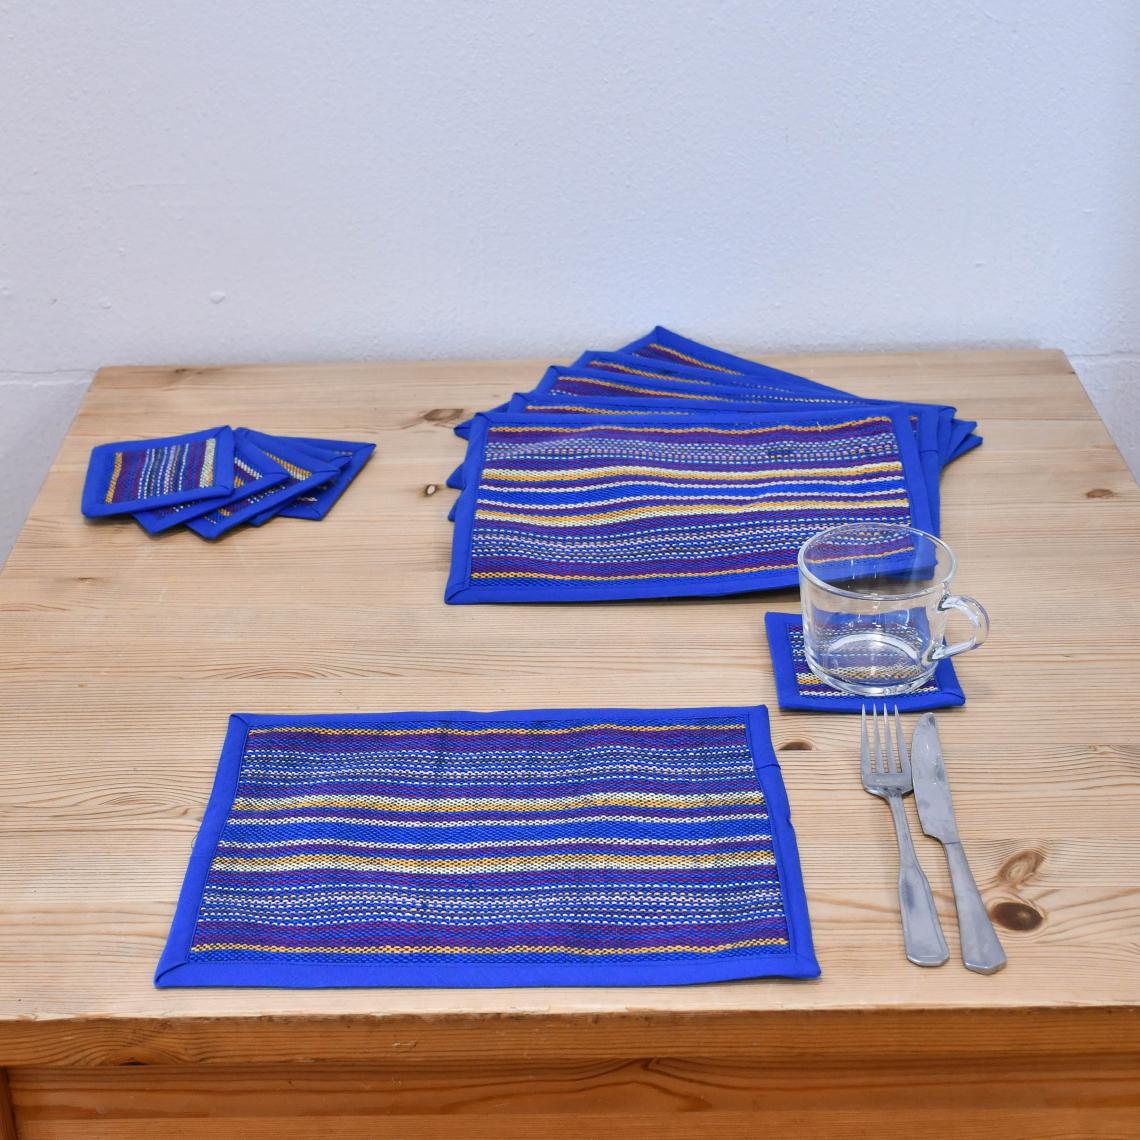 Woven placemats by Victoria House team